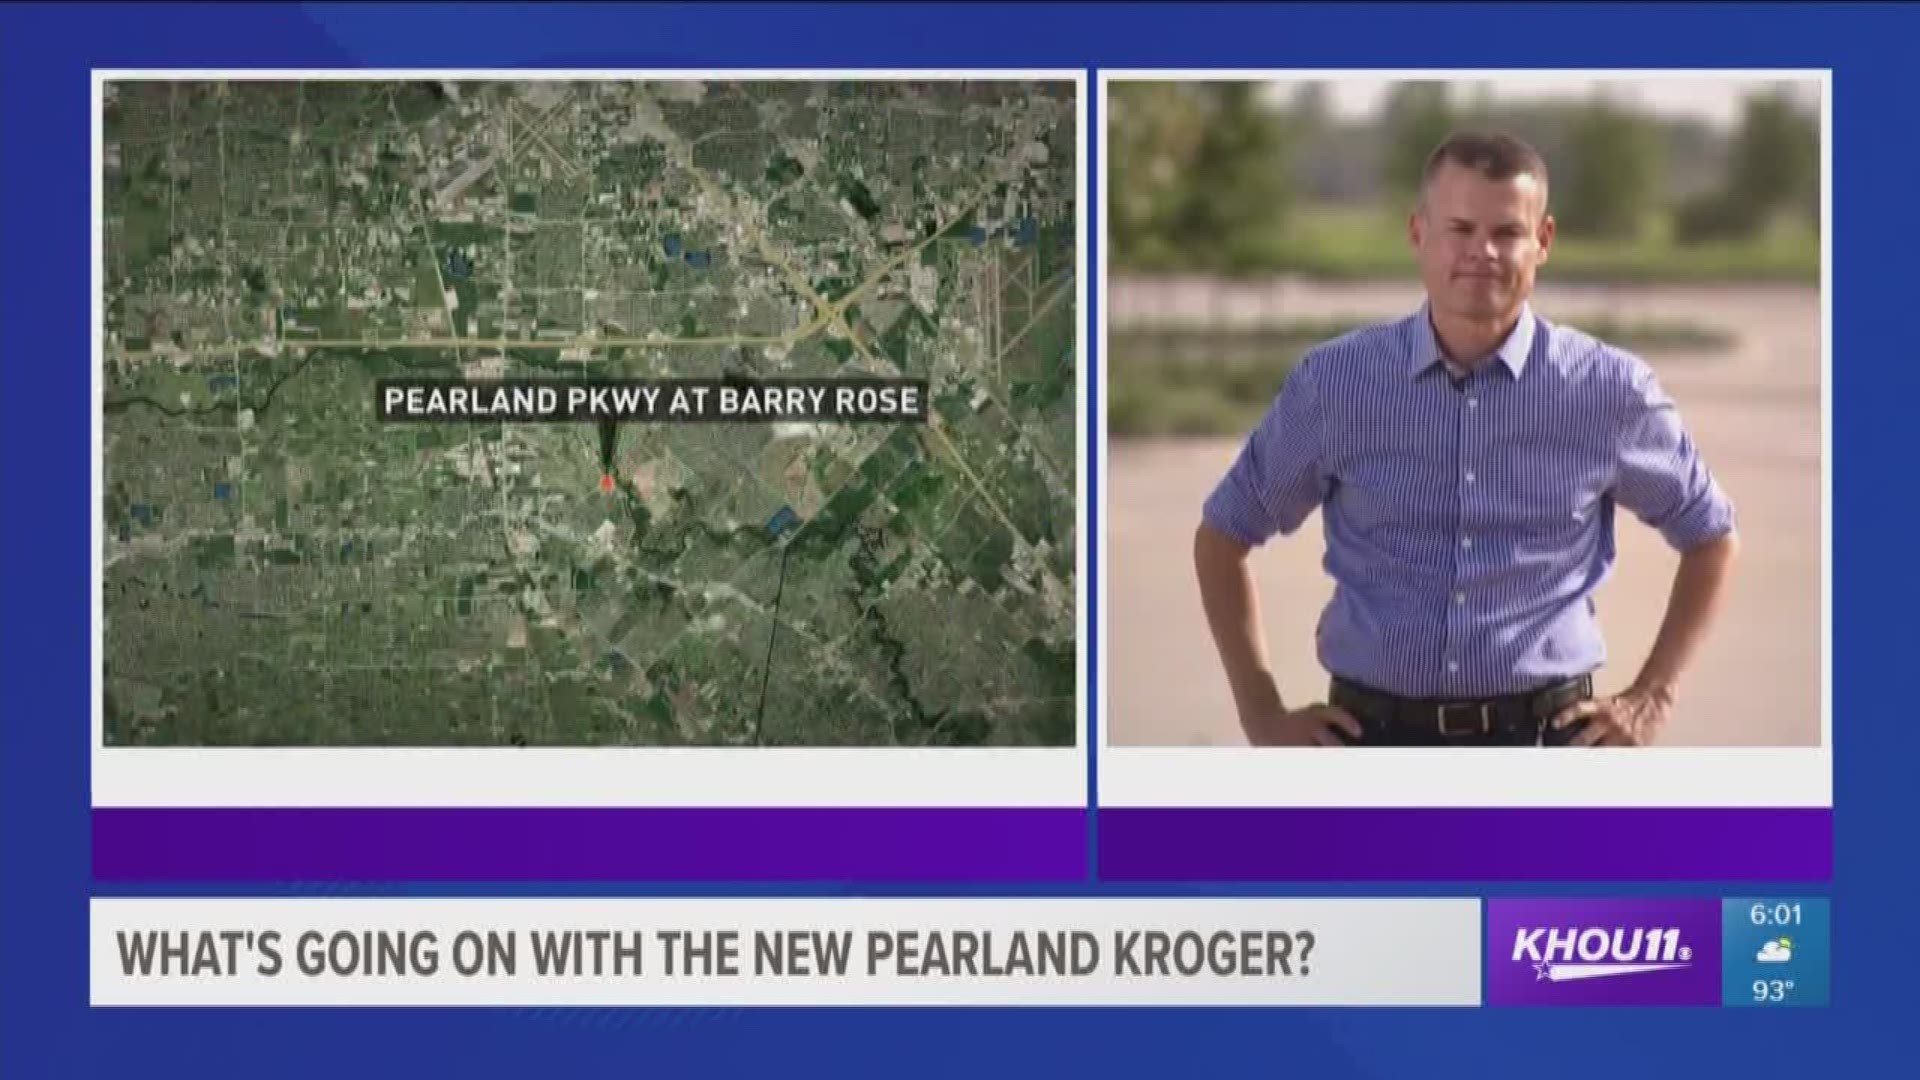 Kroger is re-evaluating plans for a new store in Pearland. It's been almost two years since ground broke and still no store. What's going on?